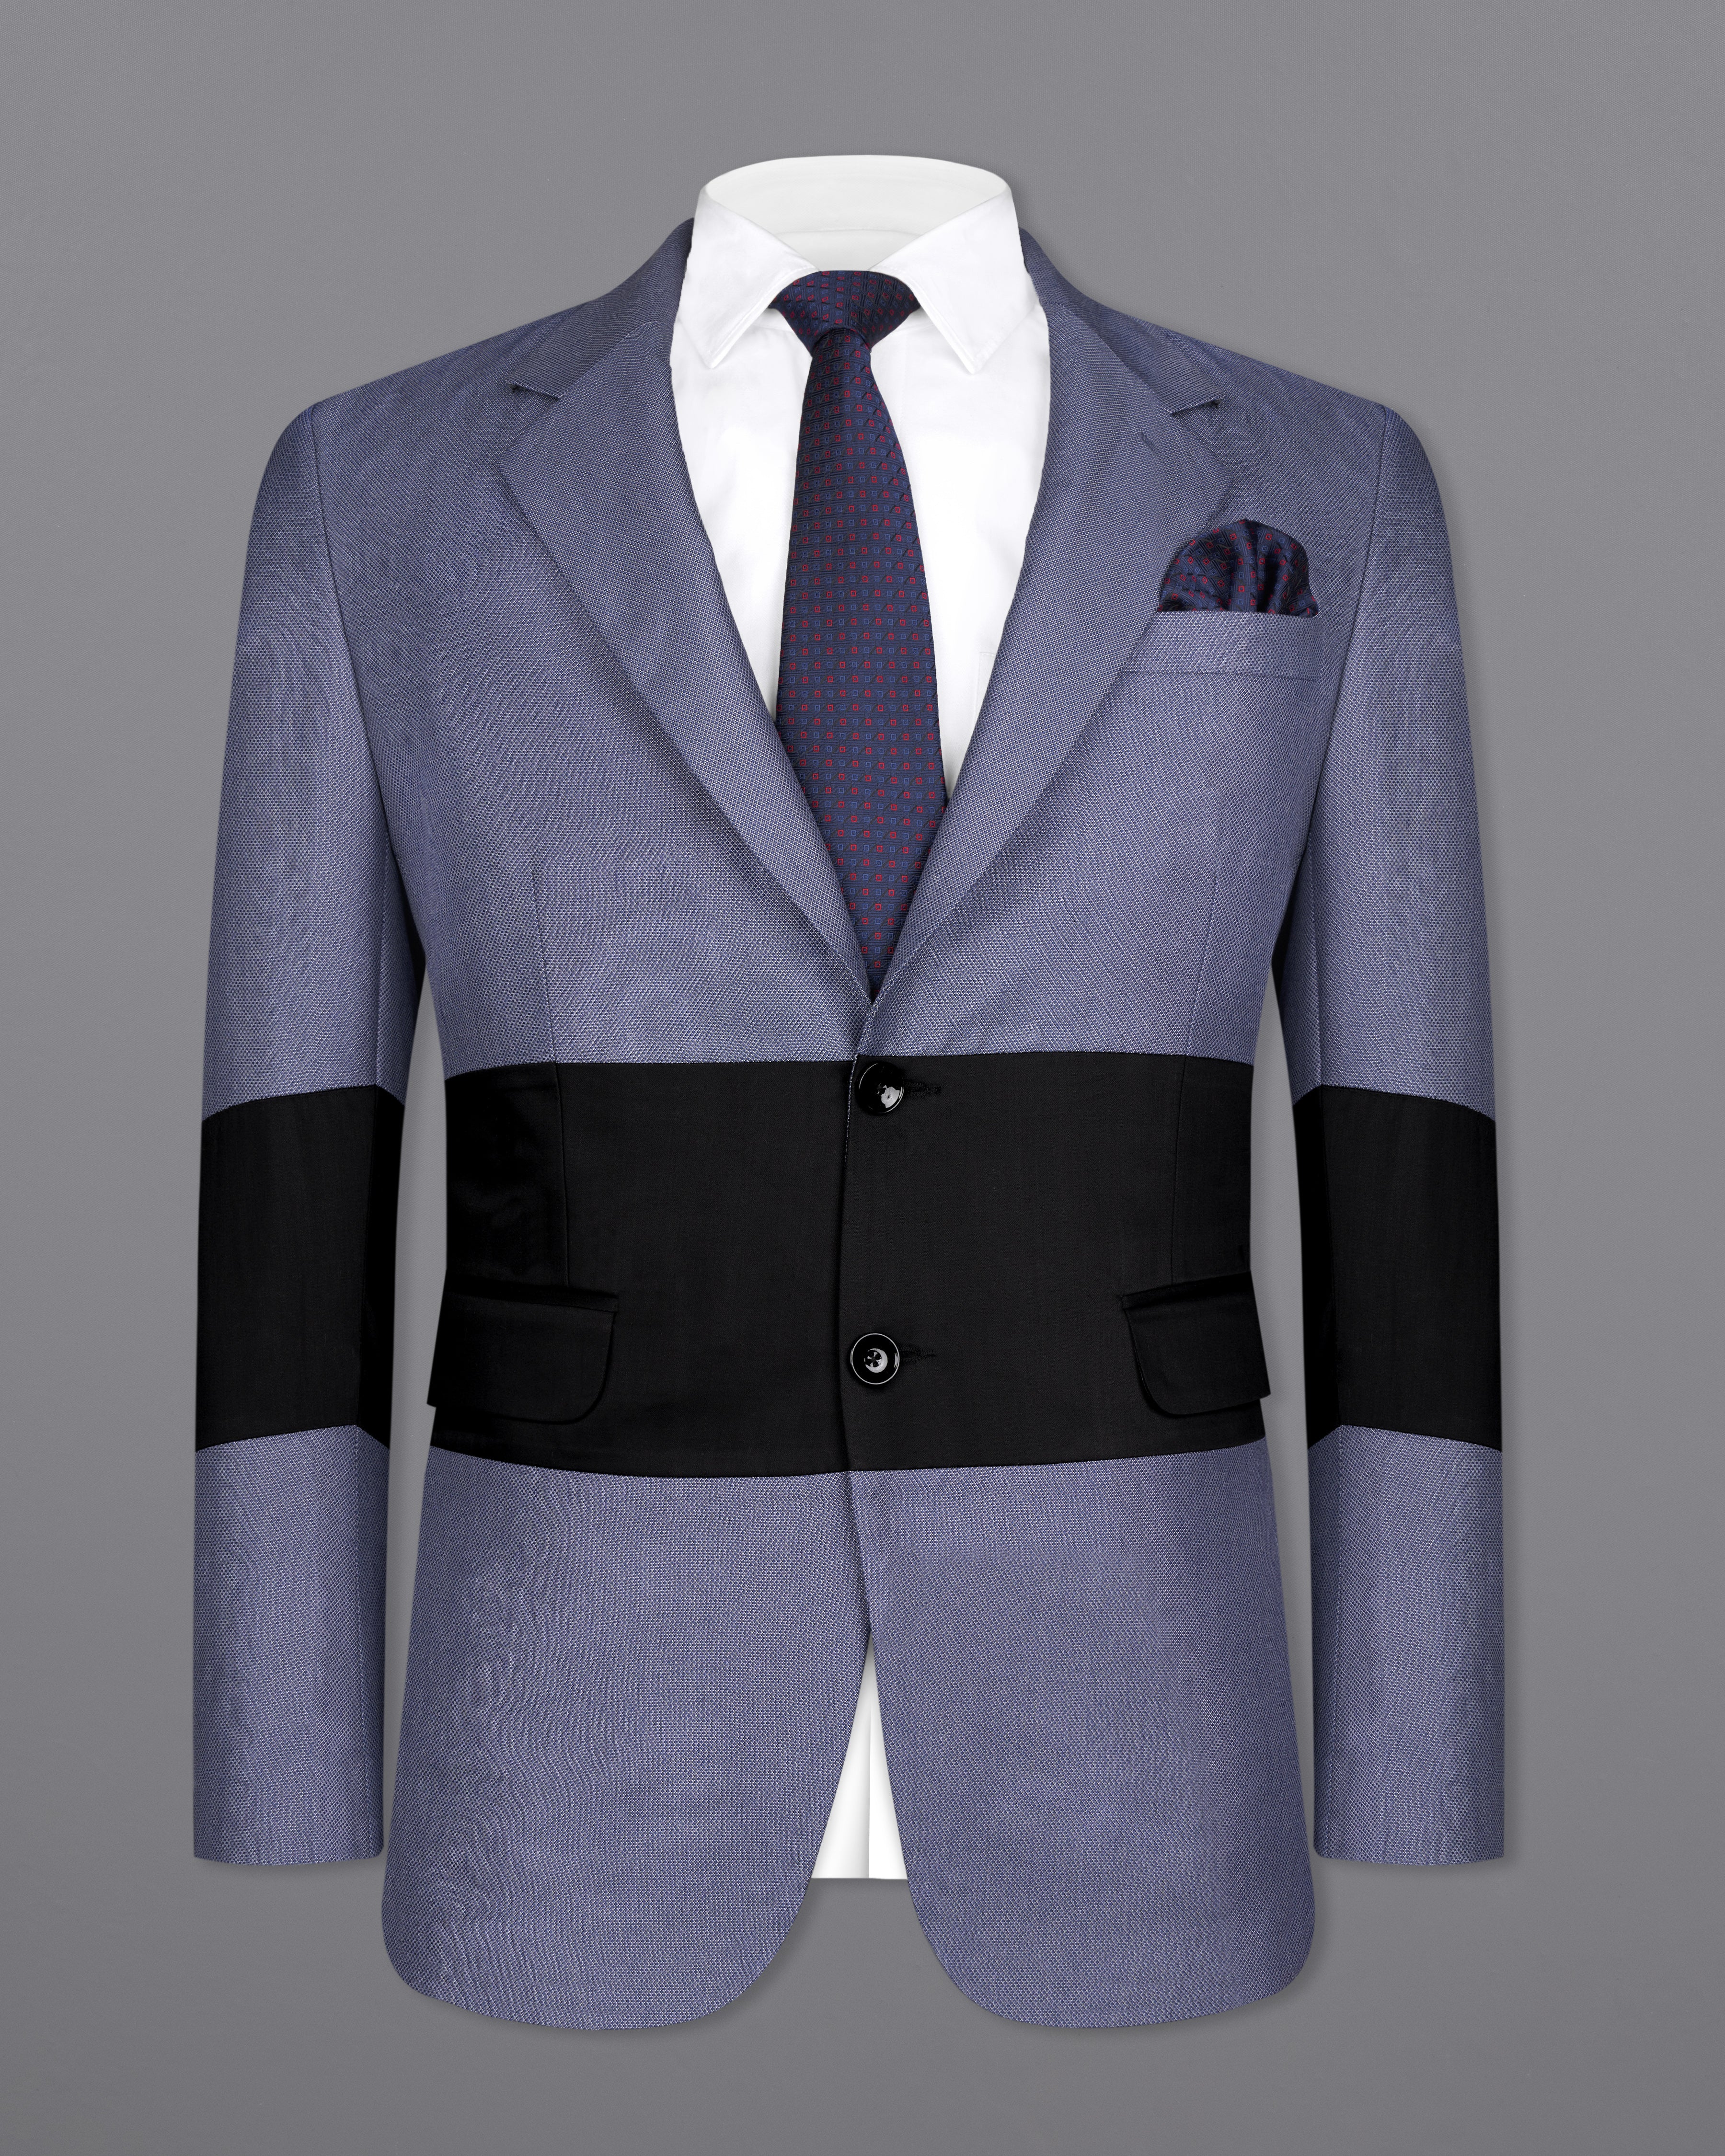 Dolphin Blue Textured Single Breasted Designer Suit ST2613-SB-D19-36, ST2613-SB-D19-38, ST2613-SB-D19-40, ST2613-SB-D19-42, ST2613-SB-D19-44, ST2613-SB-D19-46, ST2613-SB-D19-48, ST2613-SB-D19-50, ST2613-SB-D19-52, ST2613-SB-D19-54, ST2613-SB-D19-56, ST2613-SB-D19-58, ST2613-SB-D19-60